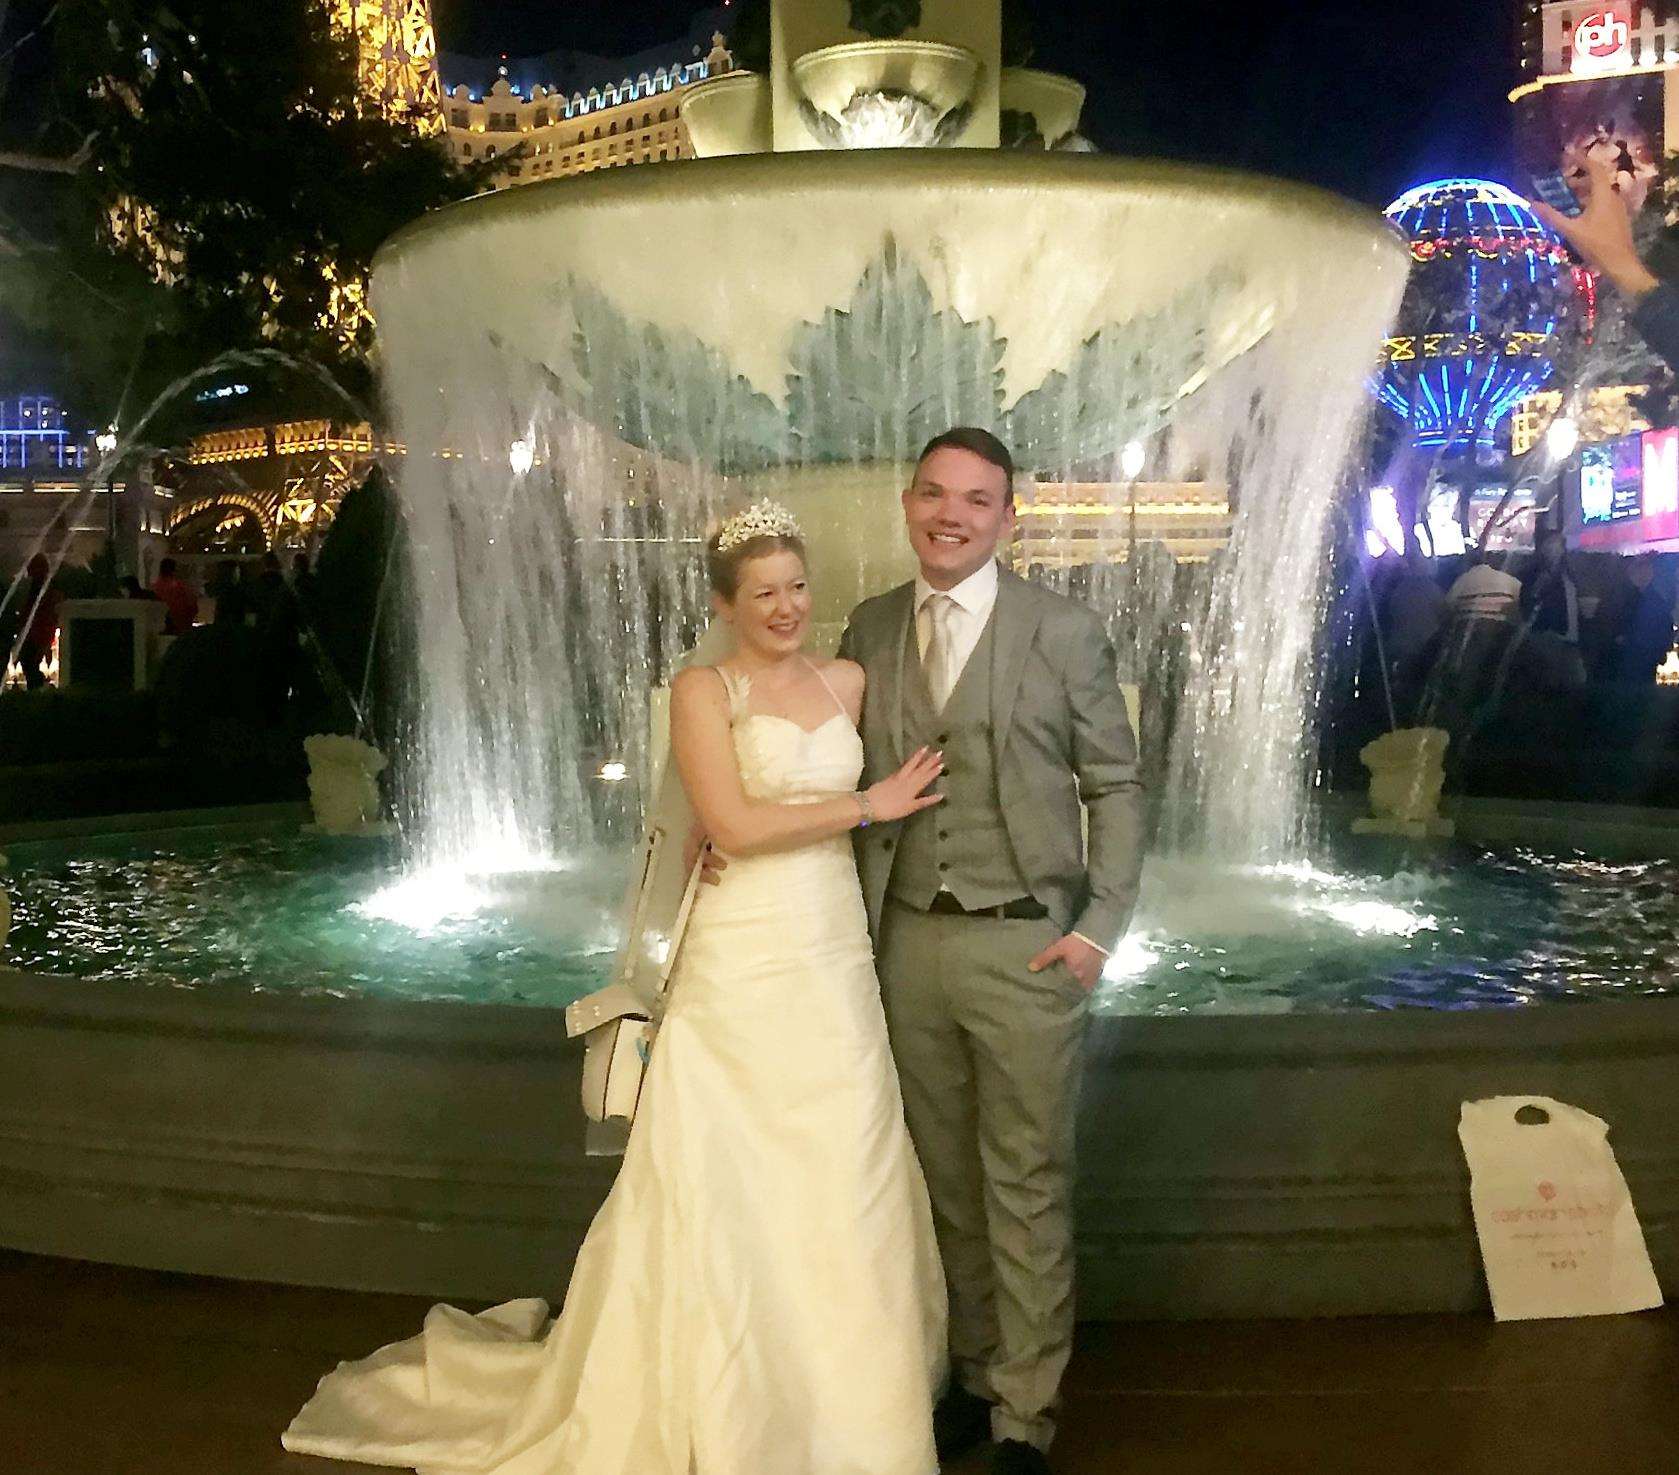 Sarah Elliott, 34, and Paul Edwards, 36, at their marriage in Las Vegas, USA. Picture: SWNS